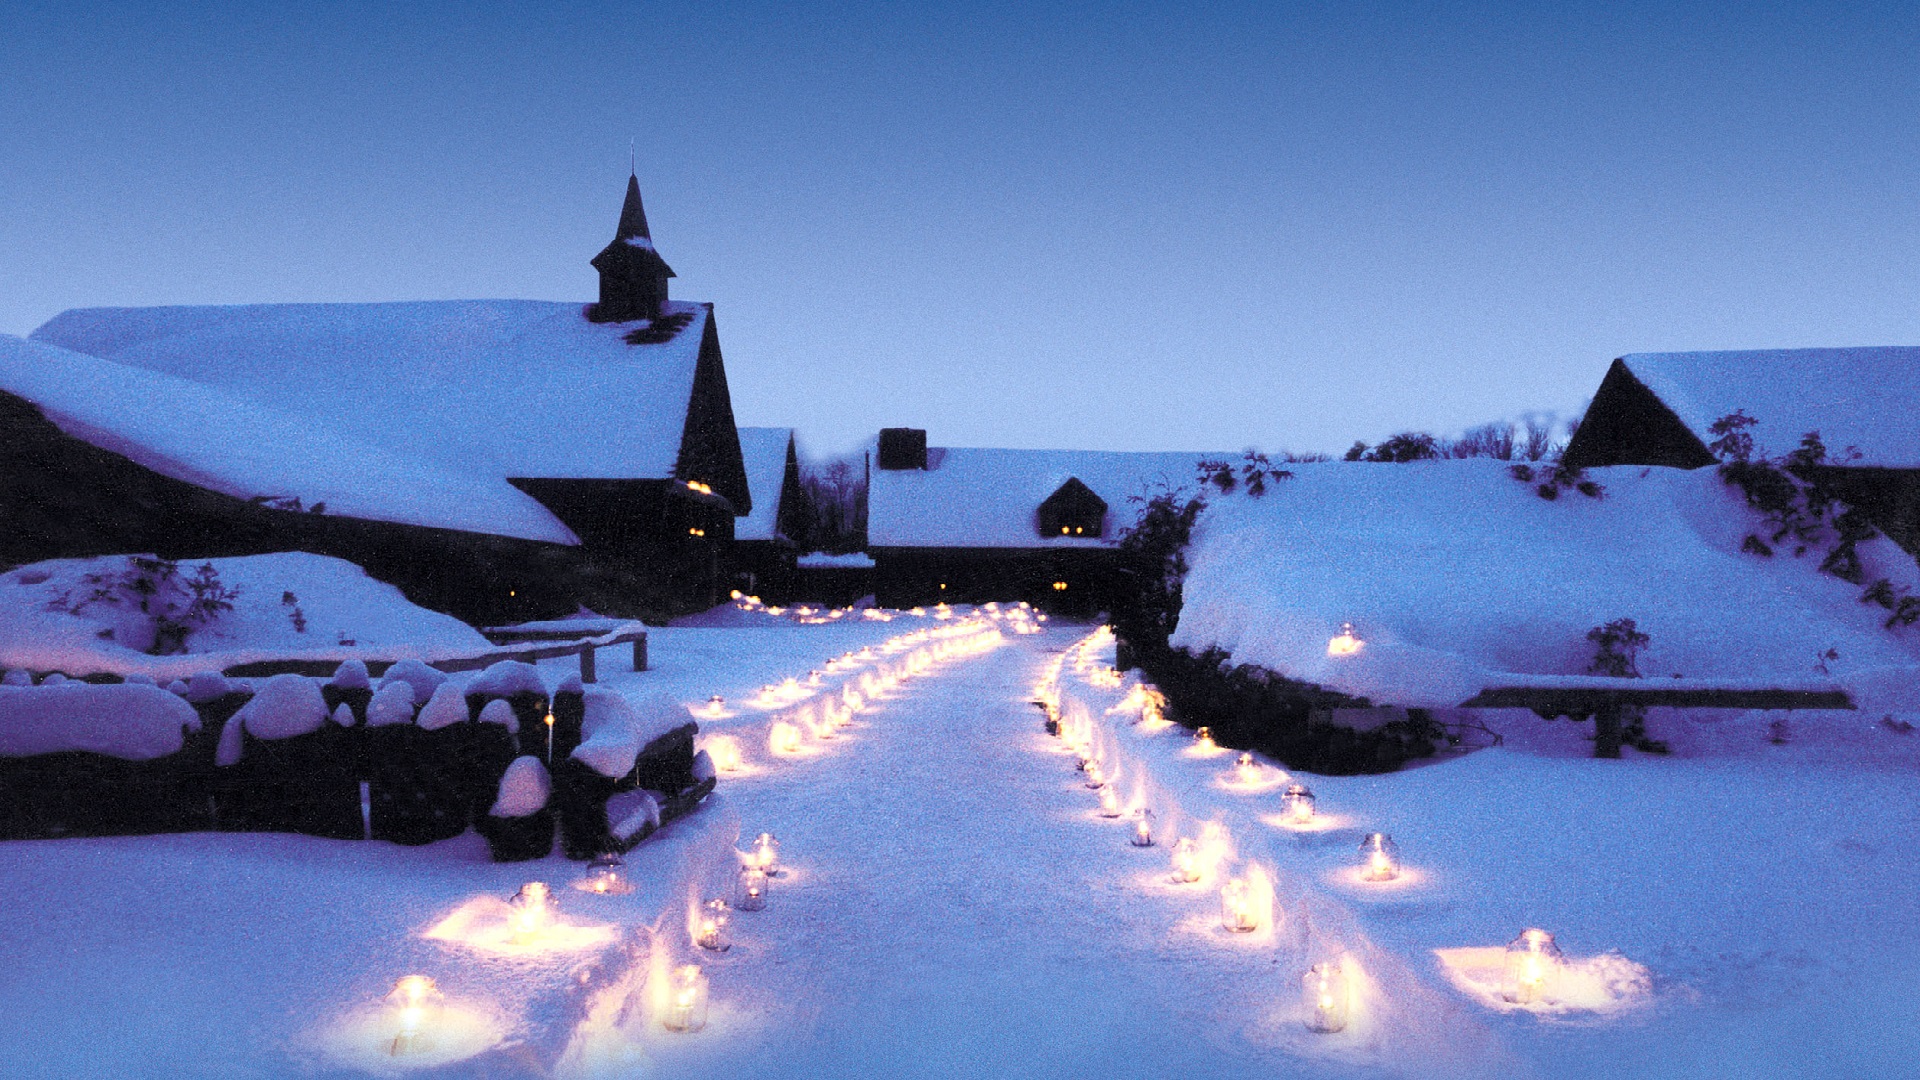 Sainte-Marie covered in snow, lit by candles